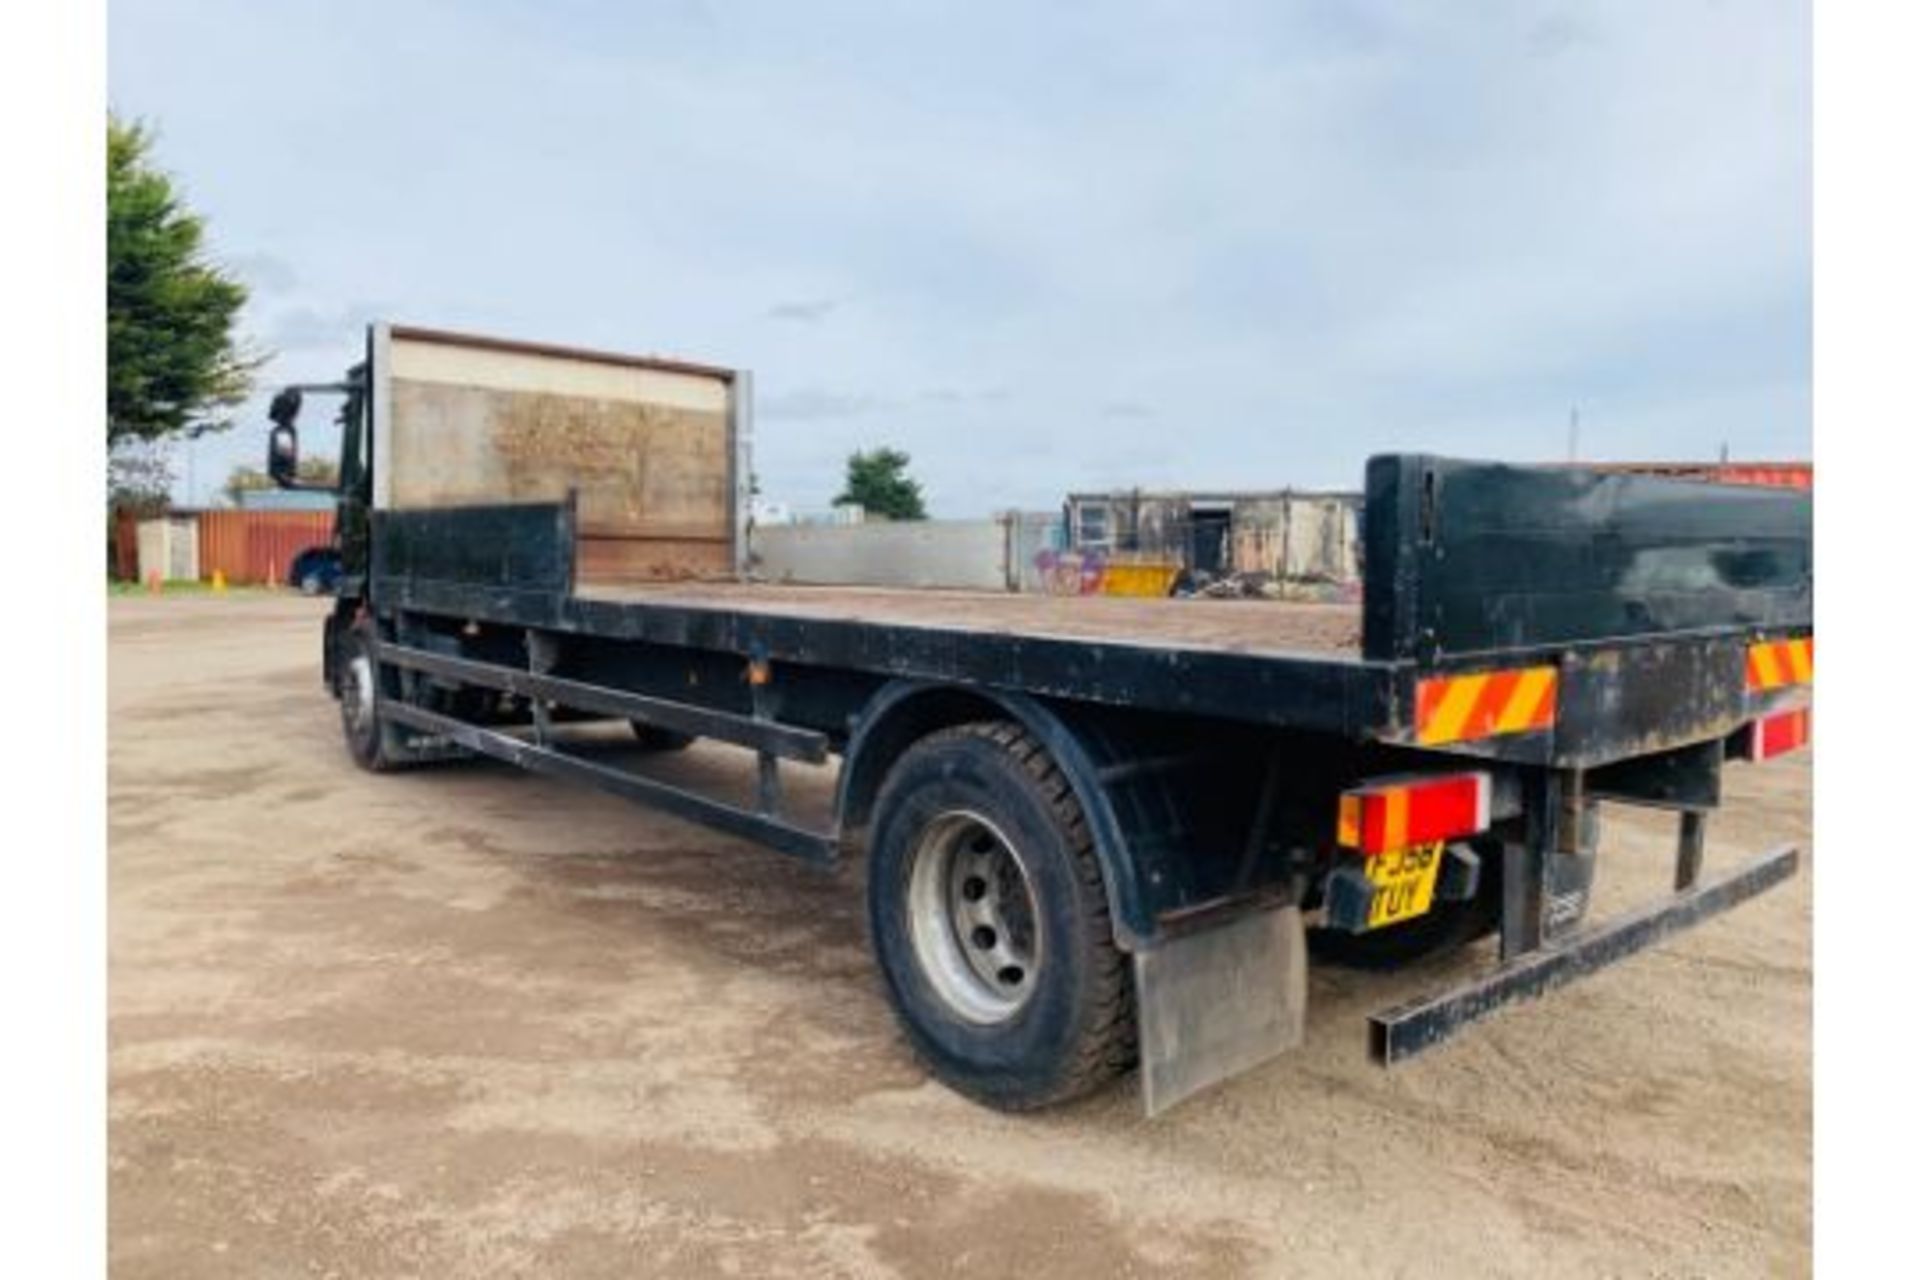 (RESERVE MET) Iveco Eurocargo 180E25 - 2009 Year - 18 Tonne - 4x2 - Day Cab Truck - Image 2 of 11